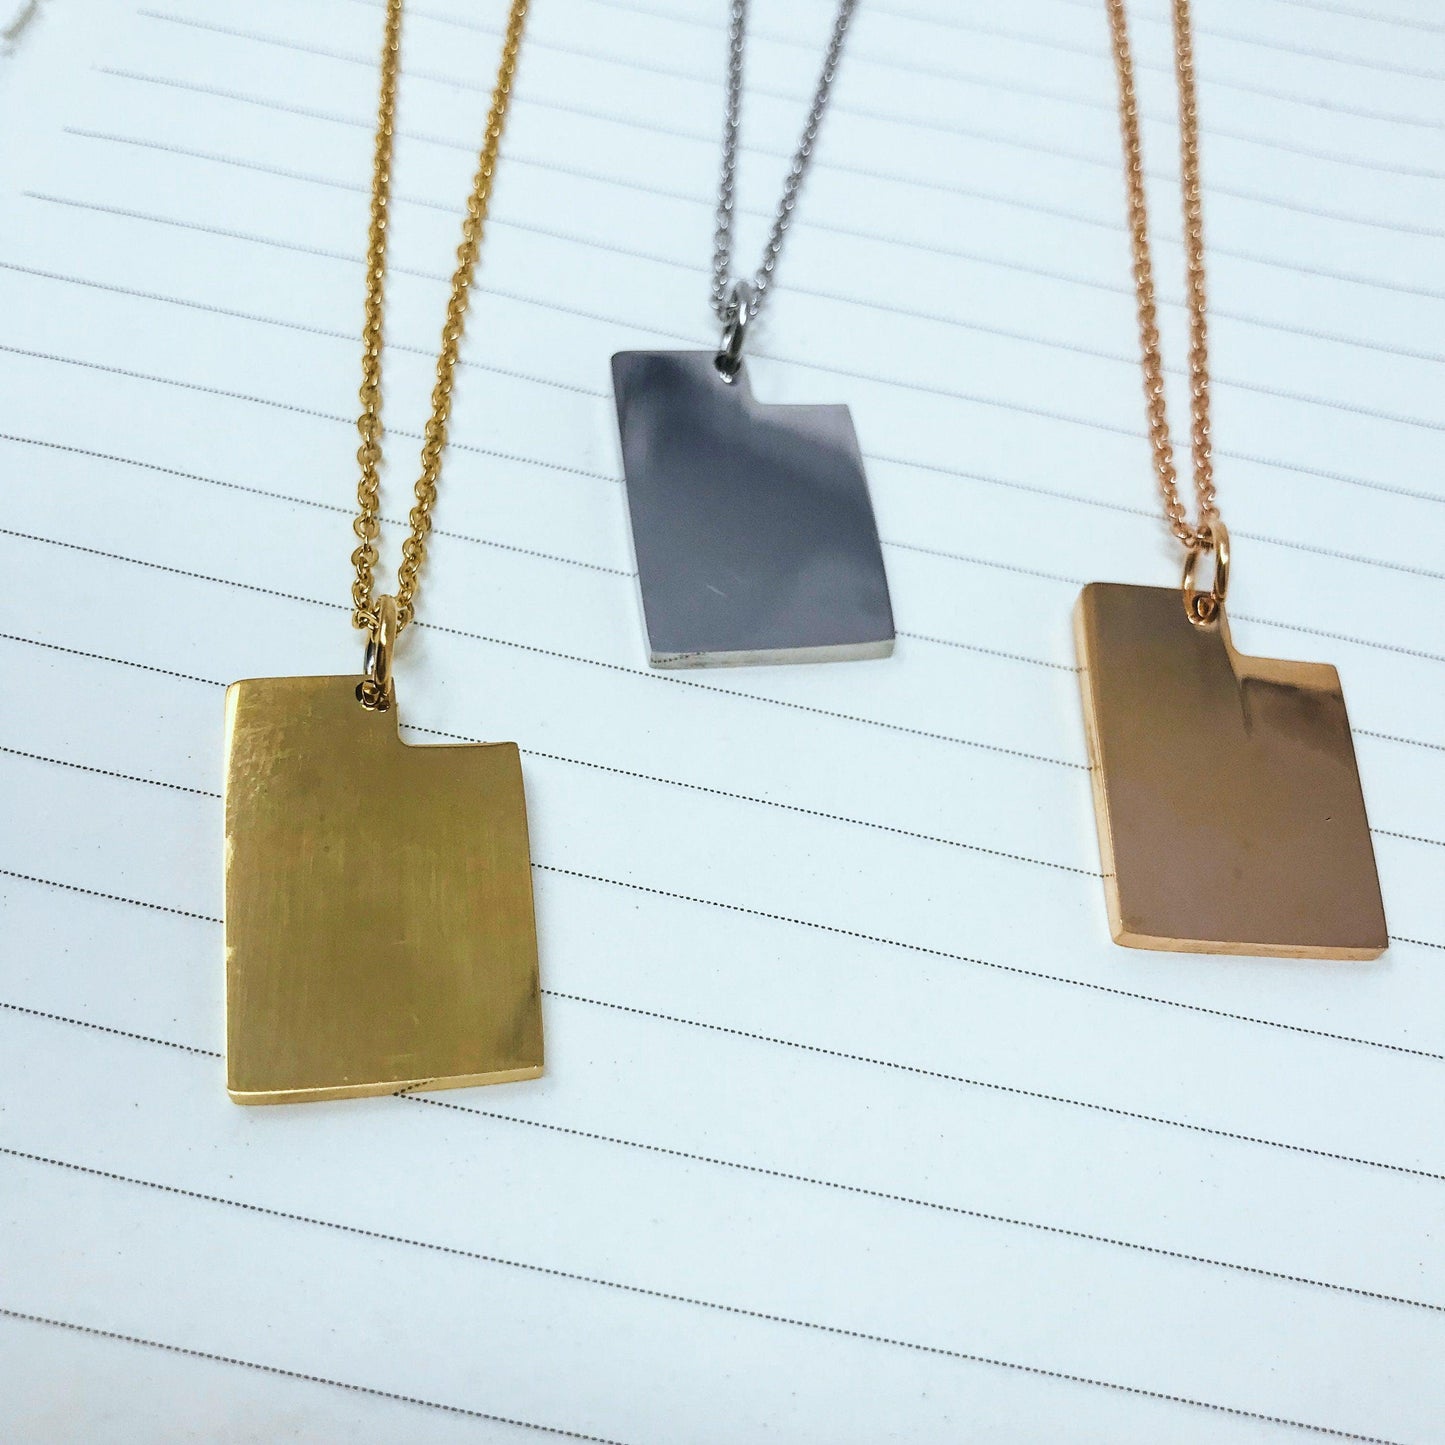 Utah State Silhouette Necklaces in 3 different colors: Gold, Silver & Rose Gold